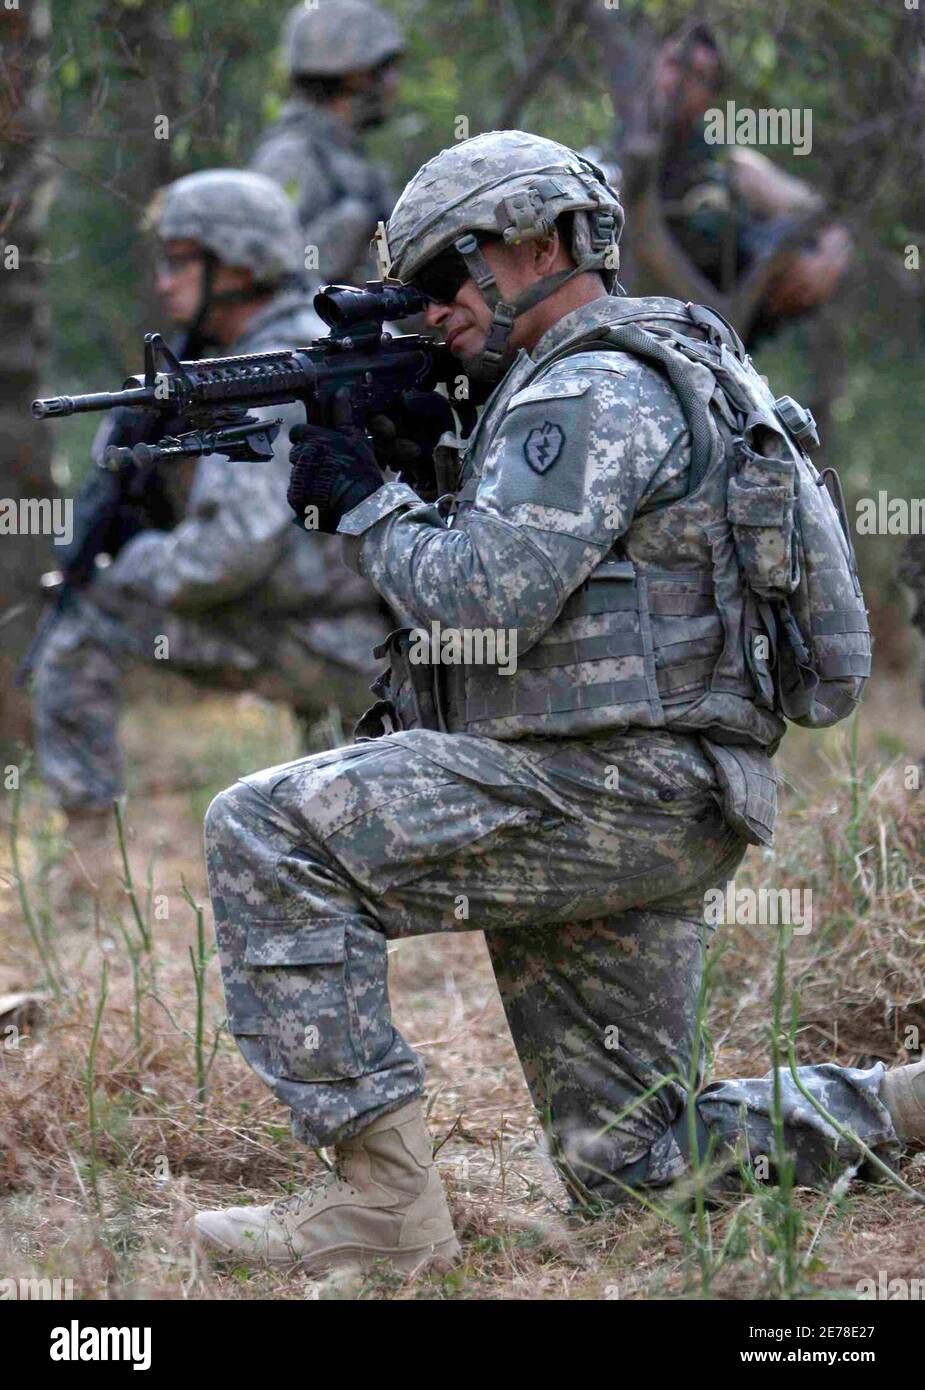 U.S. soldiers take up position during a joint  search operation with Iraqi security forces in Saadia area near Baquba, 115 km (70 miles) northeast of Baghdad May 19, 2009.   REUTERS/Saad Shalash (IRAQ MILITARY POLITICS) Foto de stock